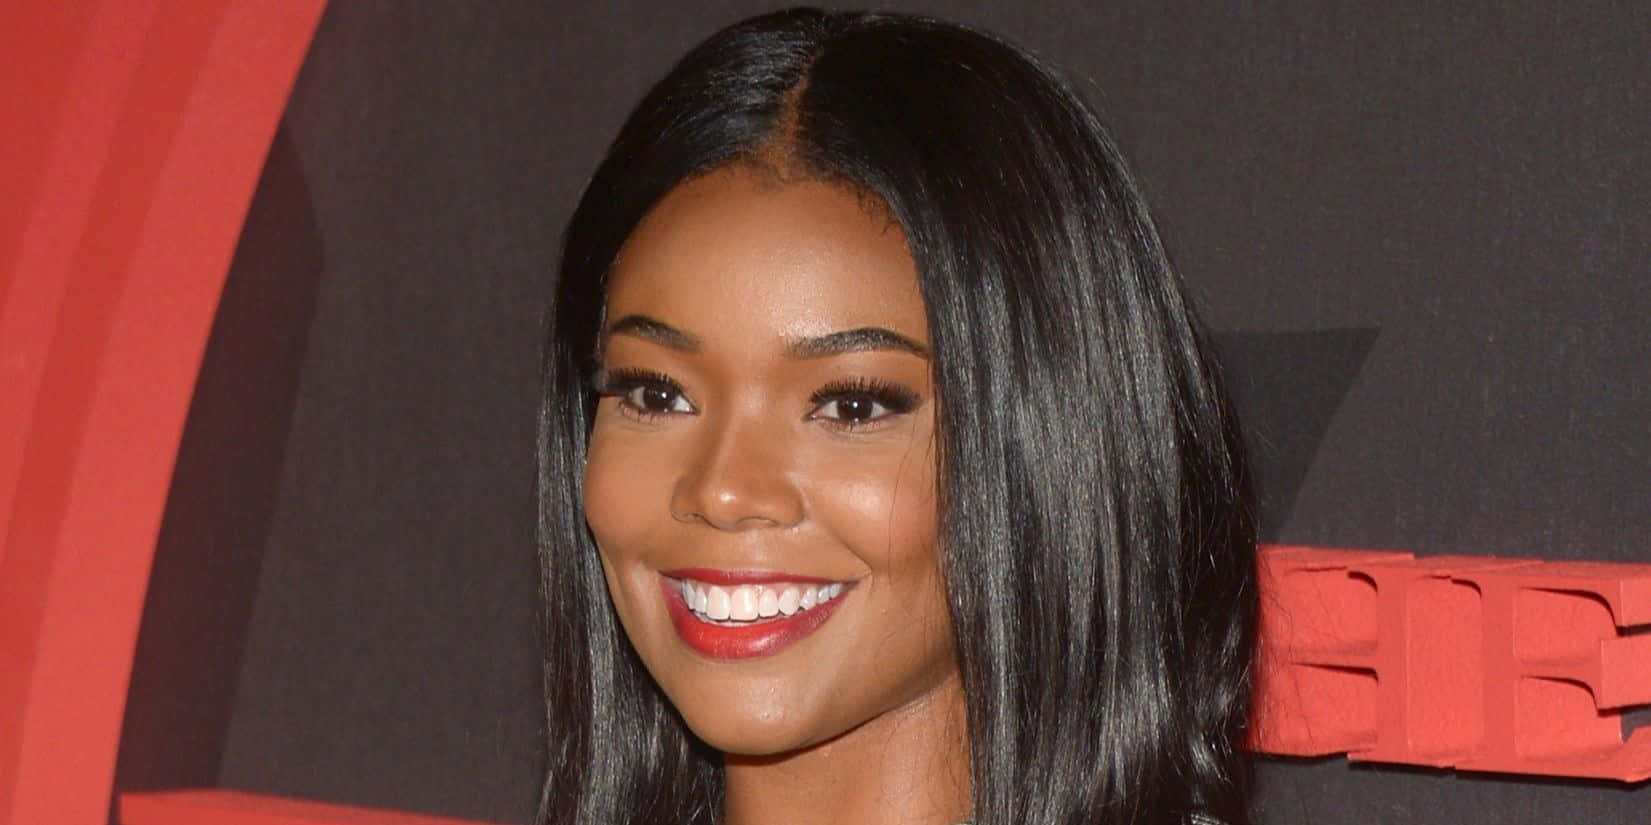 Gabrielle Union Smiling Radiantly in White Outfit Wallpaper